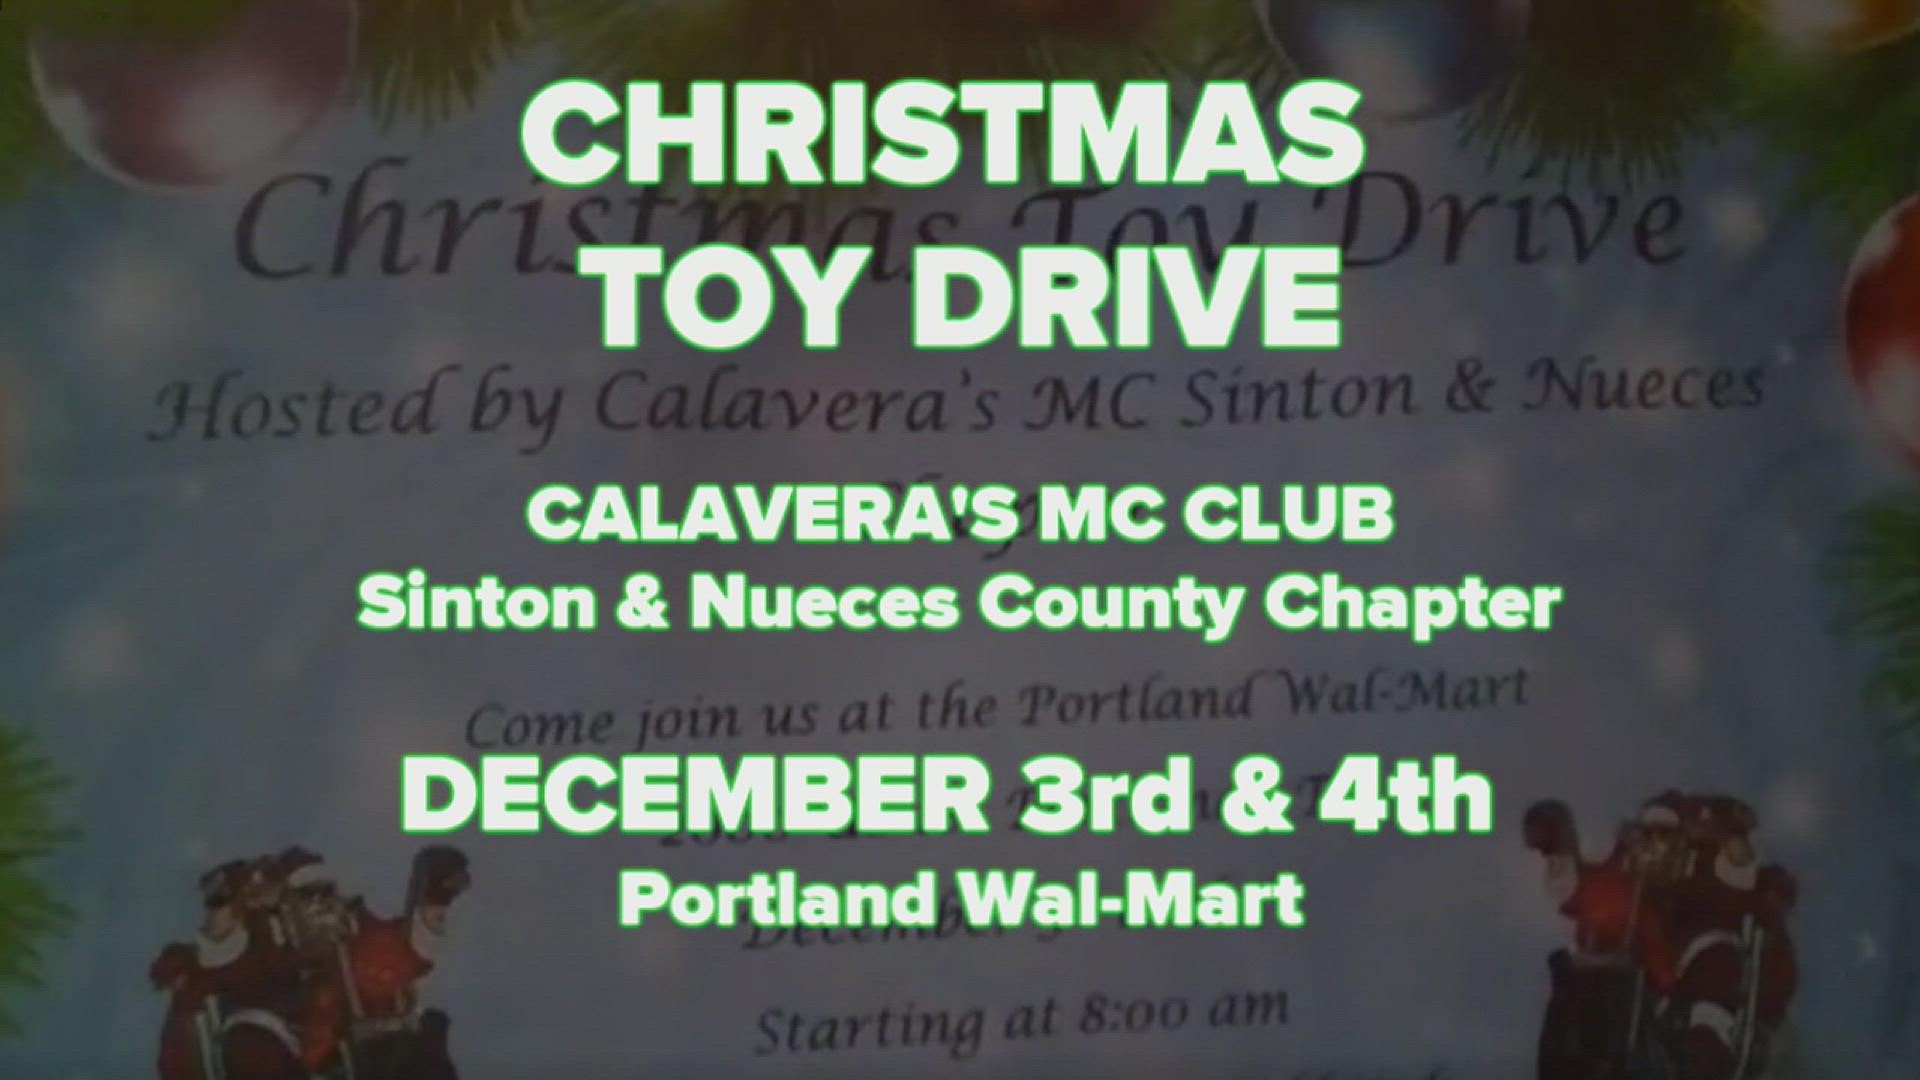 Calavera Americano, president of the Sinton chapter of the Calaveras Motorcycle Club, joined us live to raise awareness of their Christmas Toy Drive.